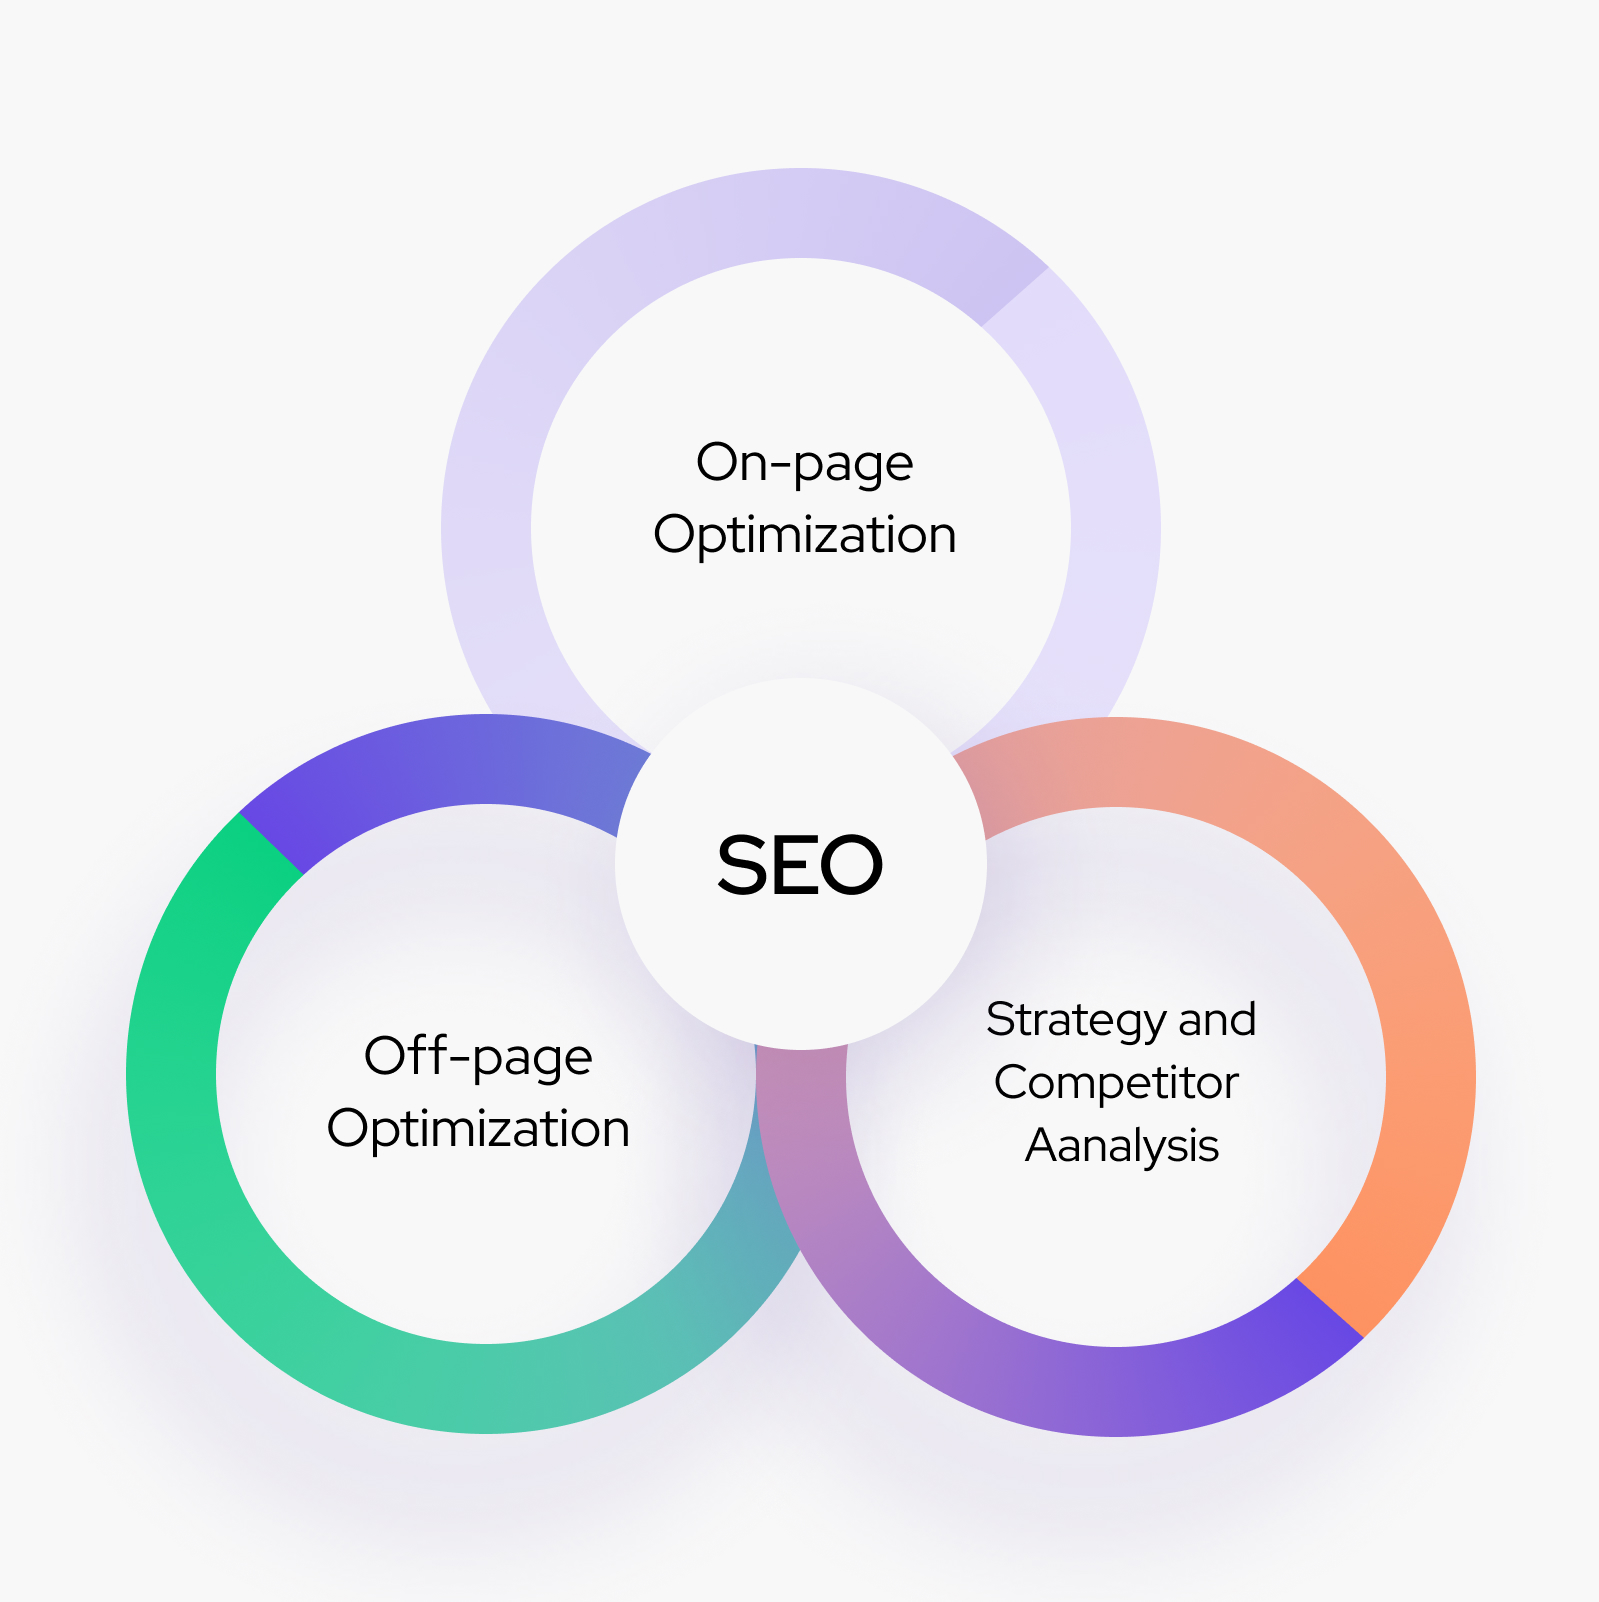 SEO - on-page, off-page optimization, strategy and competitor analysis